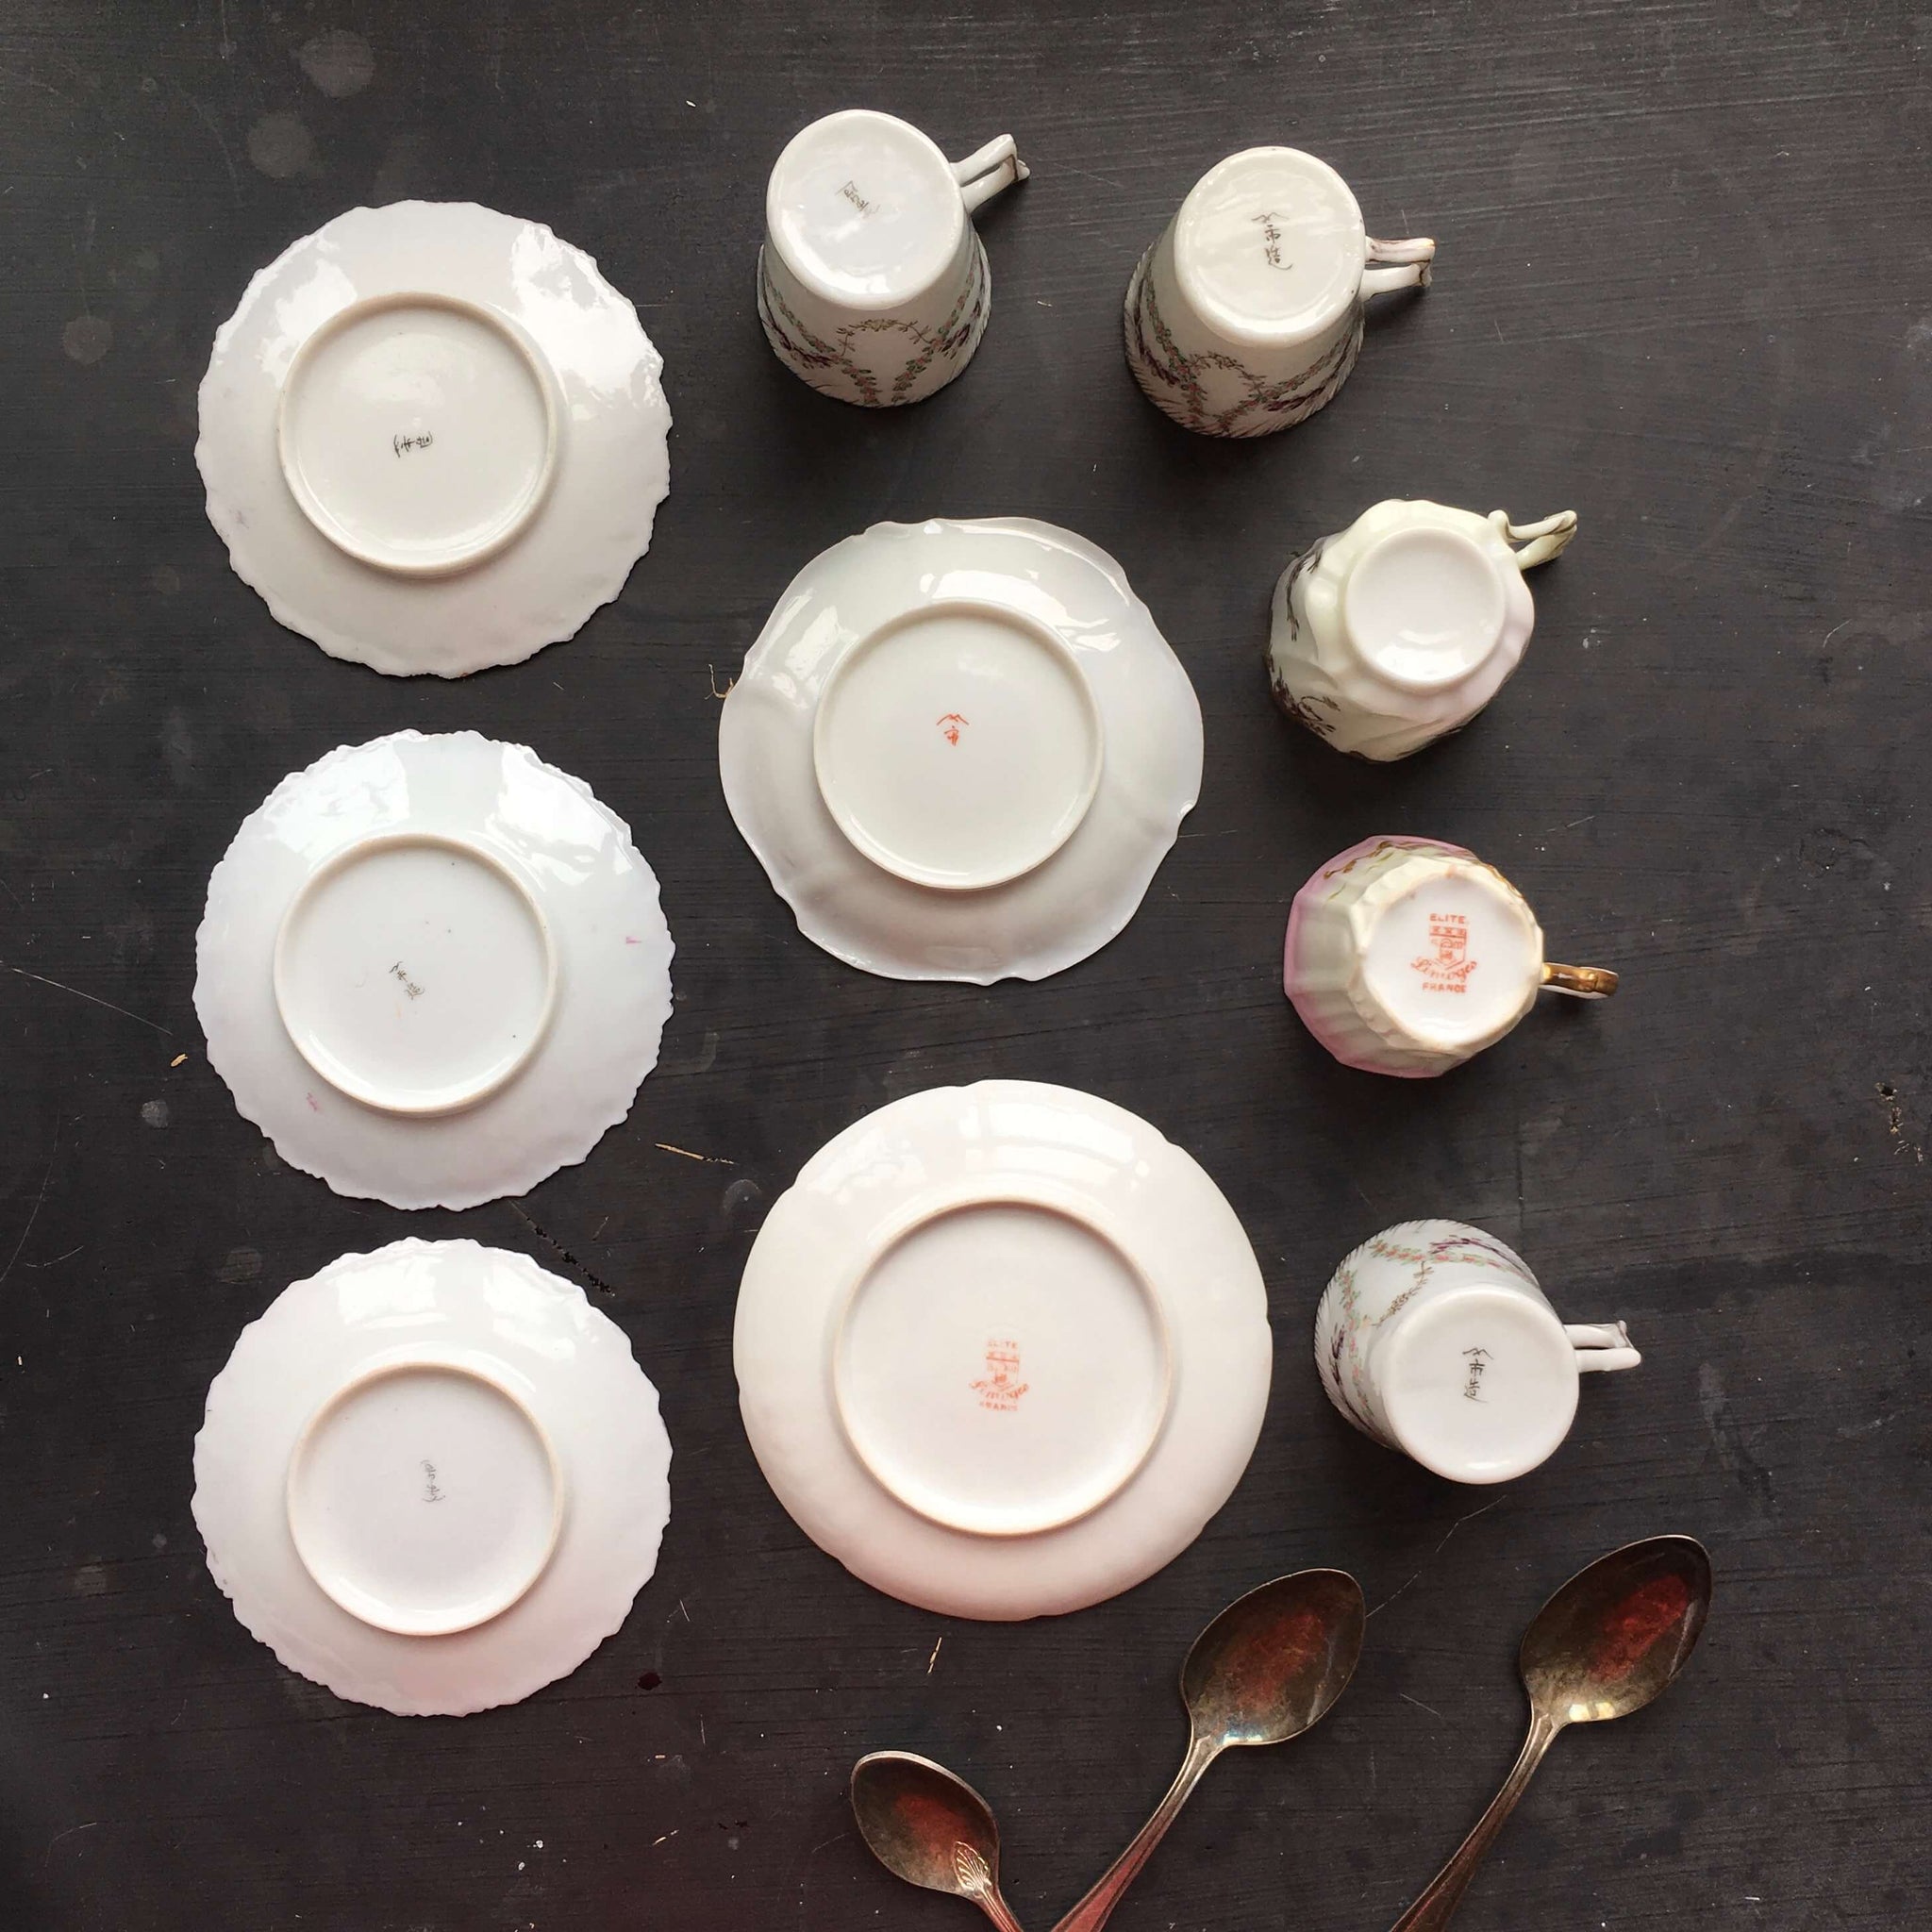 Antique Porcelain Demitasse Collection - 12 Pieces- French Limoges and Japanese Handpainted Floral Sets